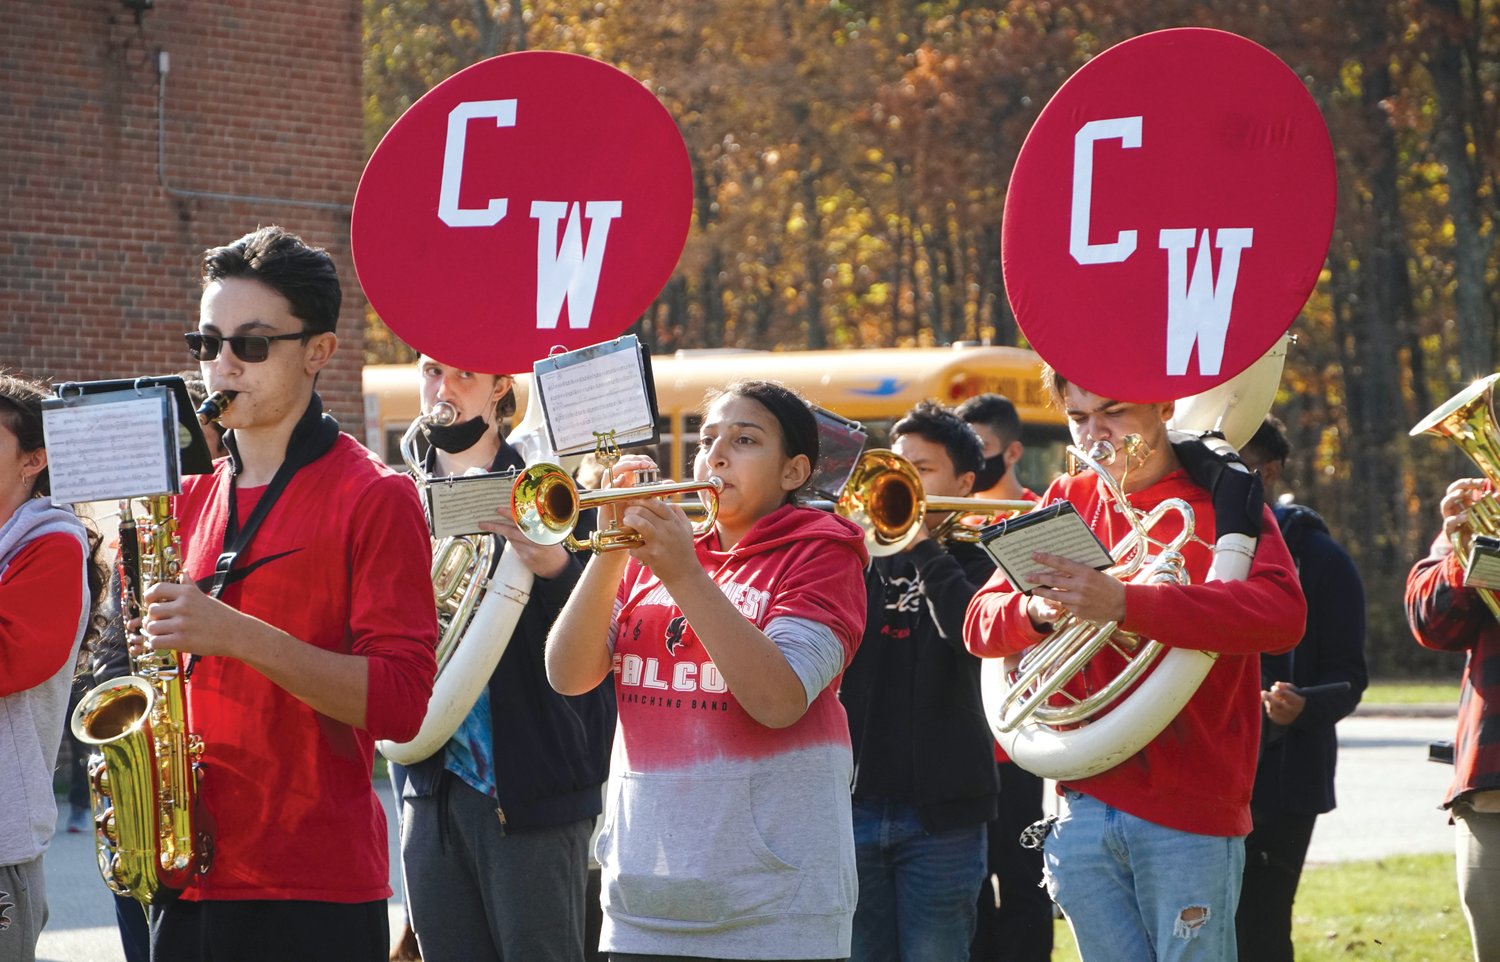 SONGS FOR THE OCCASIONS: Members of the Cranston
West Falcon Band entertain the crowd with patriotic songs
during Glen Hills' Veterans Day Celebration on November 10.
The event's honored guests were loved ones of students who
serve or served in some branch of the armed forces